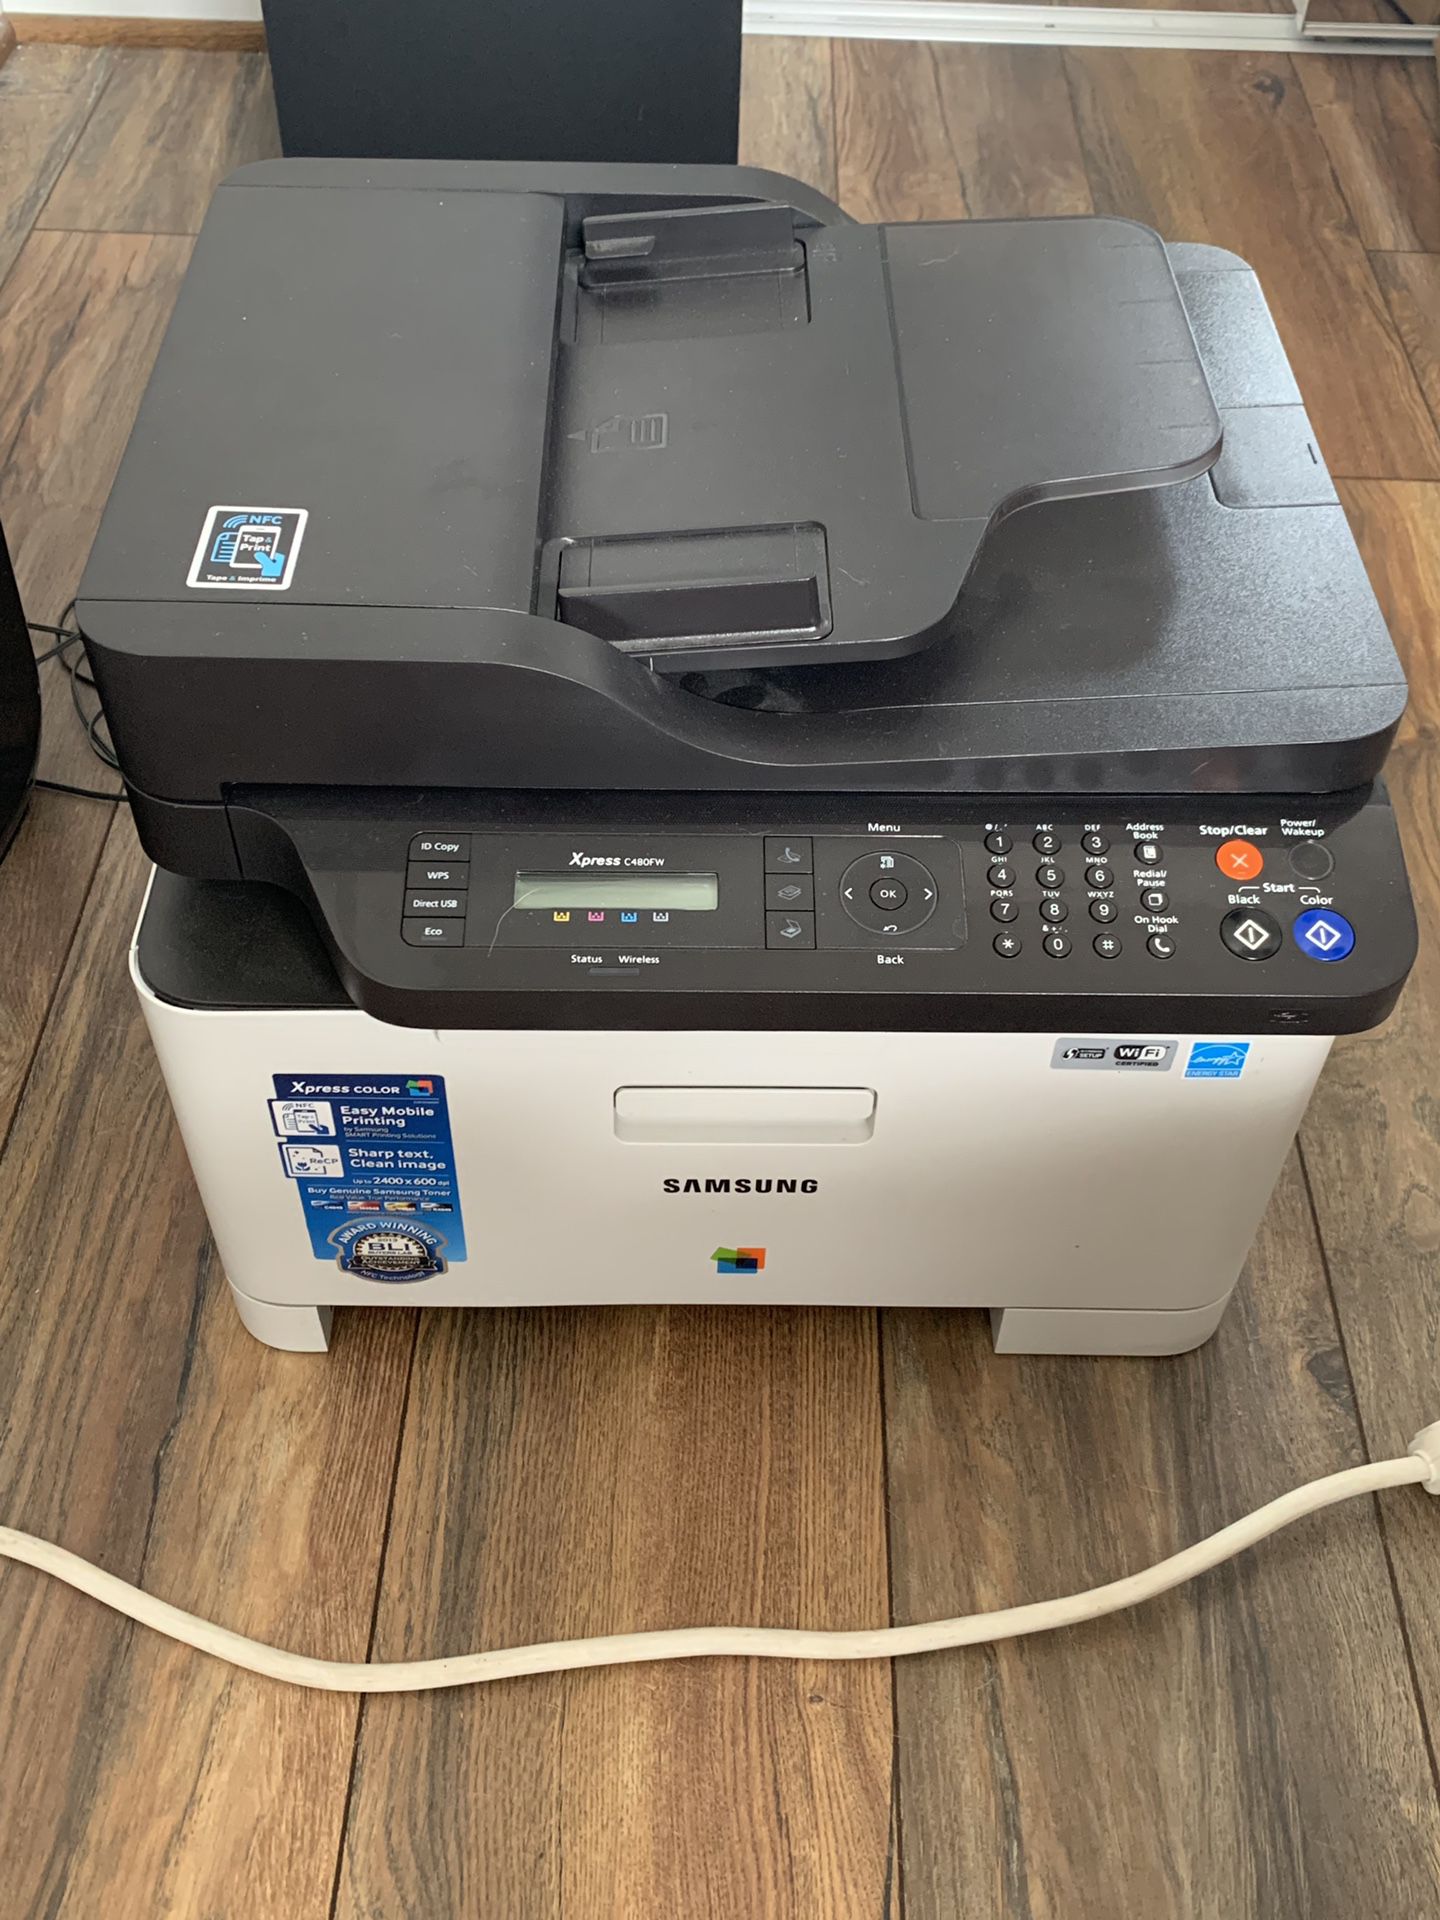 Samsung Xpress C480FW all in one laser printer